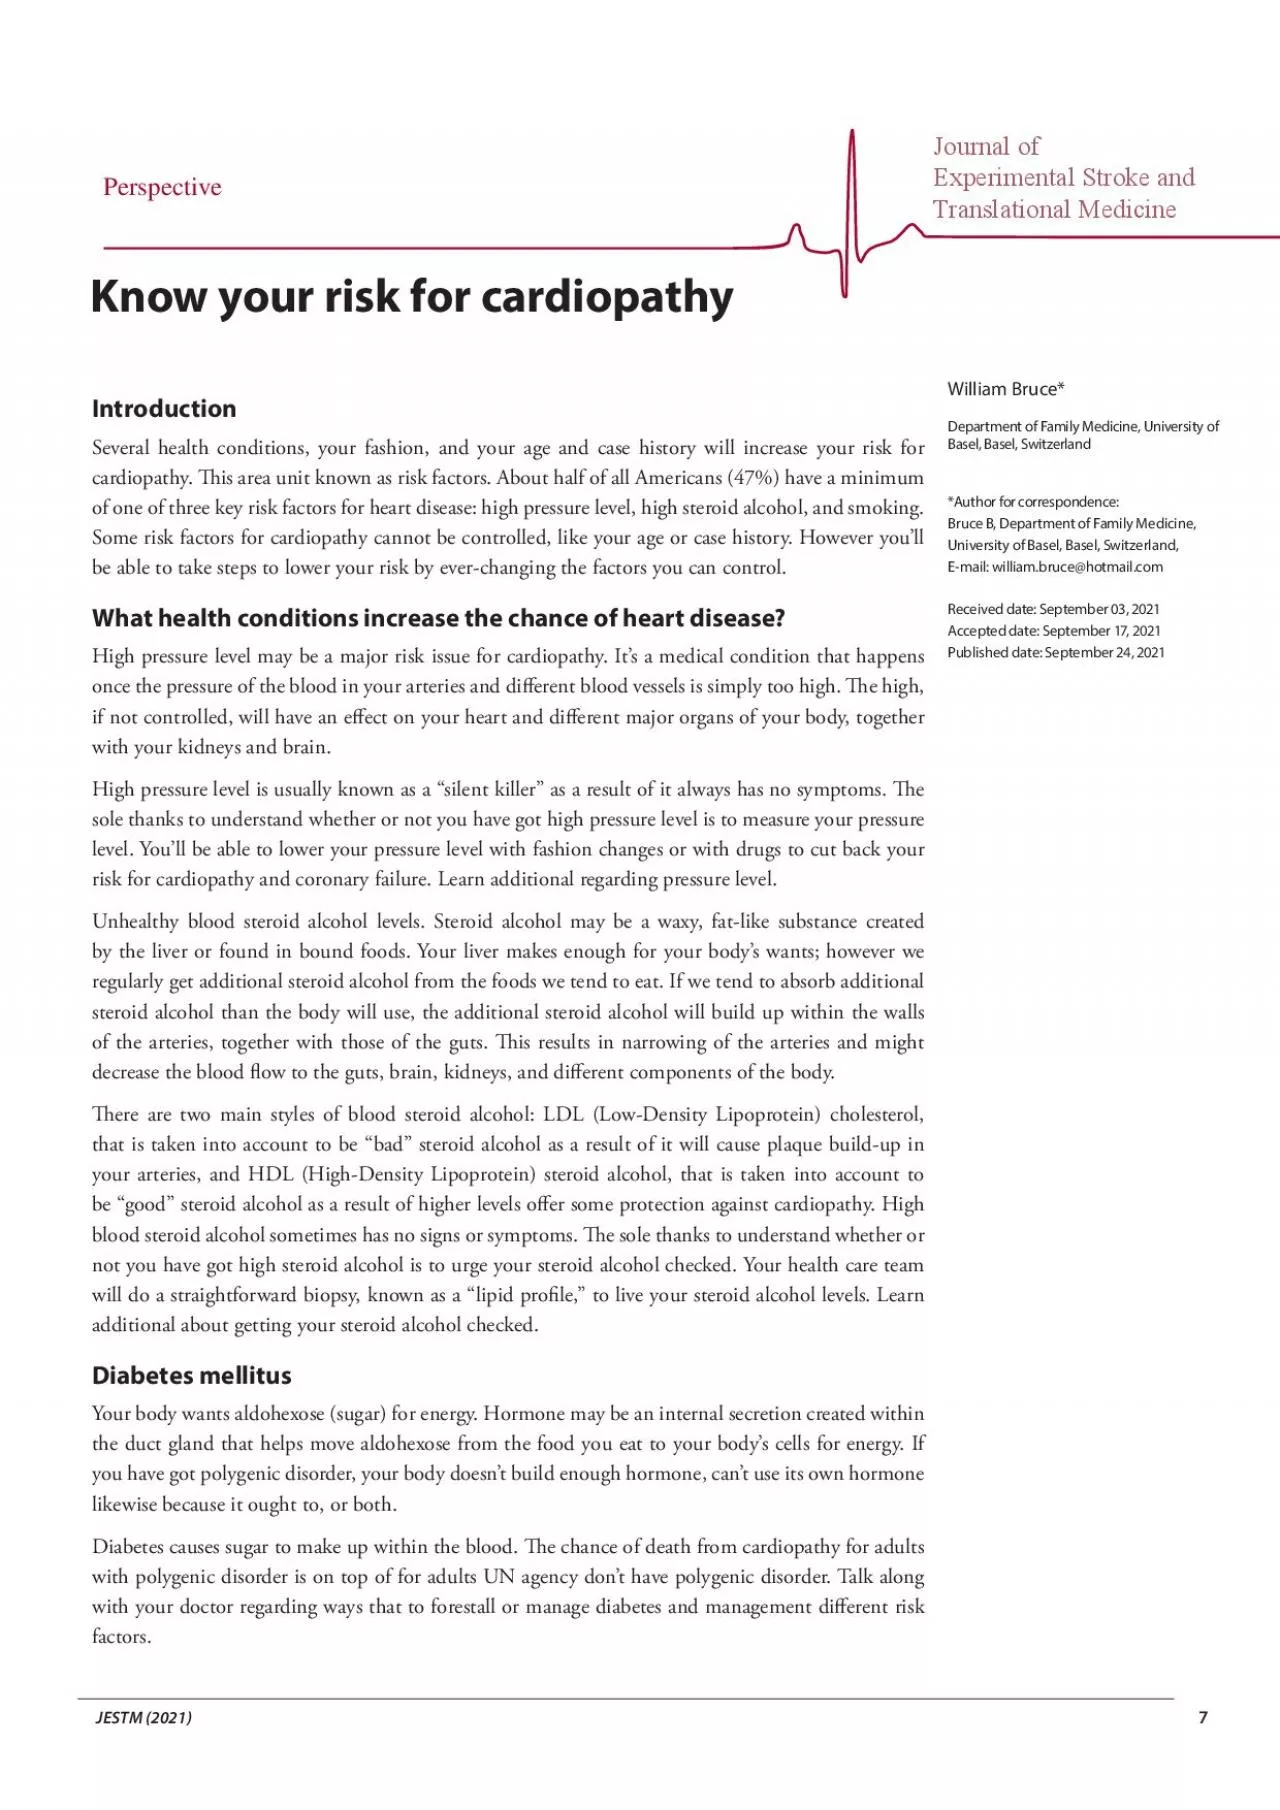 Know your risk for cardiopathy